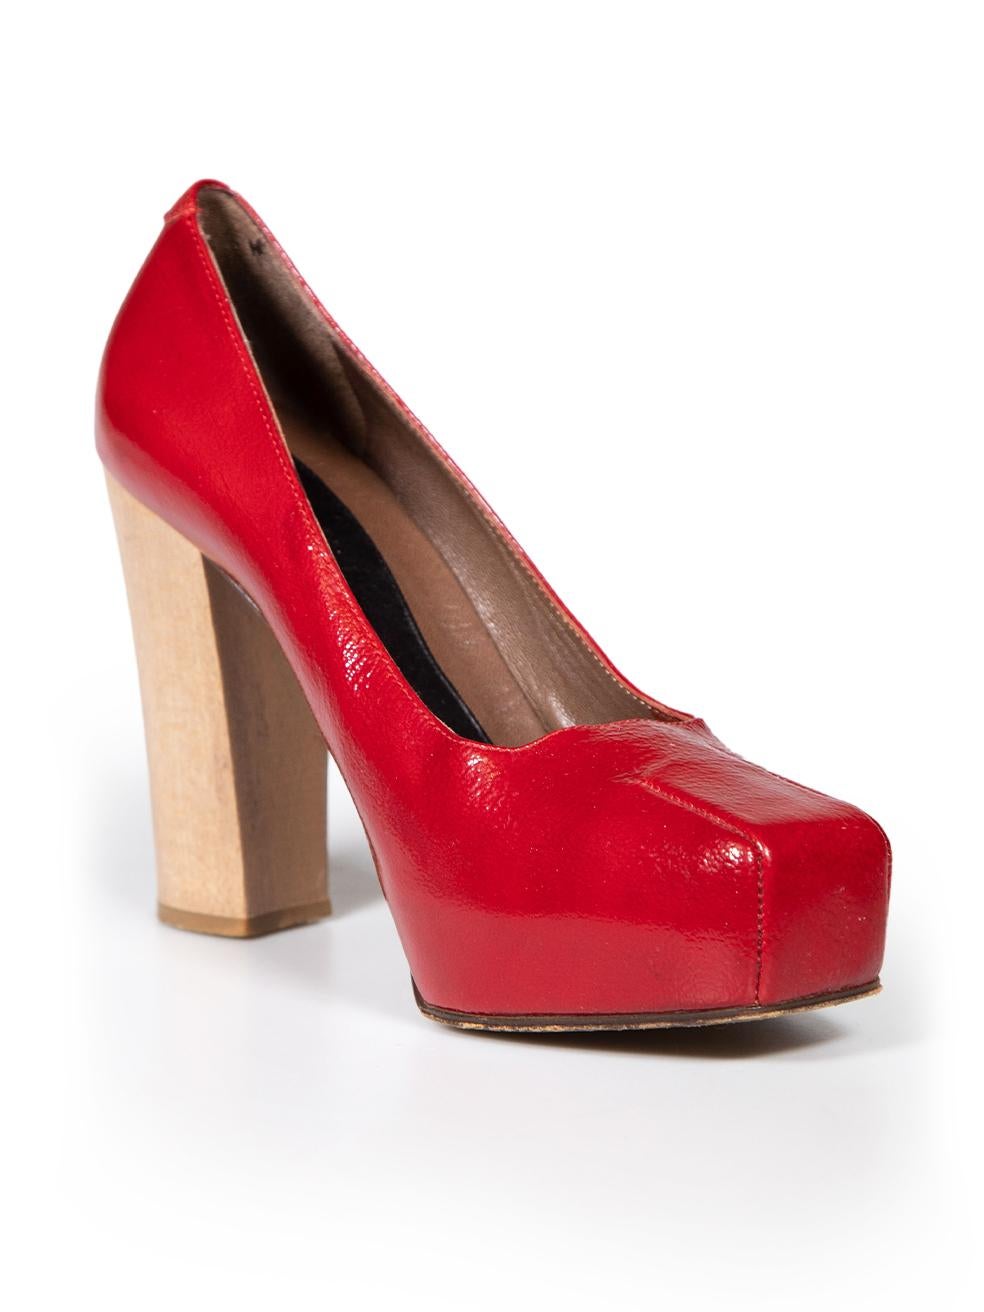 CONDITION is Good. General wear to pumps is evident. Moderate signs of wear to overall patent leather where discolouration and white marks is seen on this used Marni designer resale item.
 
 
 
 Details
 
 
 Red
 
 Patent leather
 
 Heels
 
